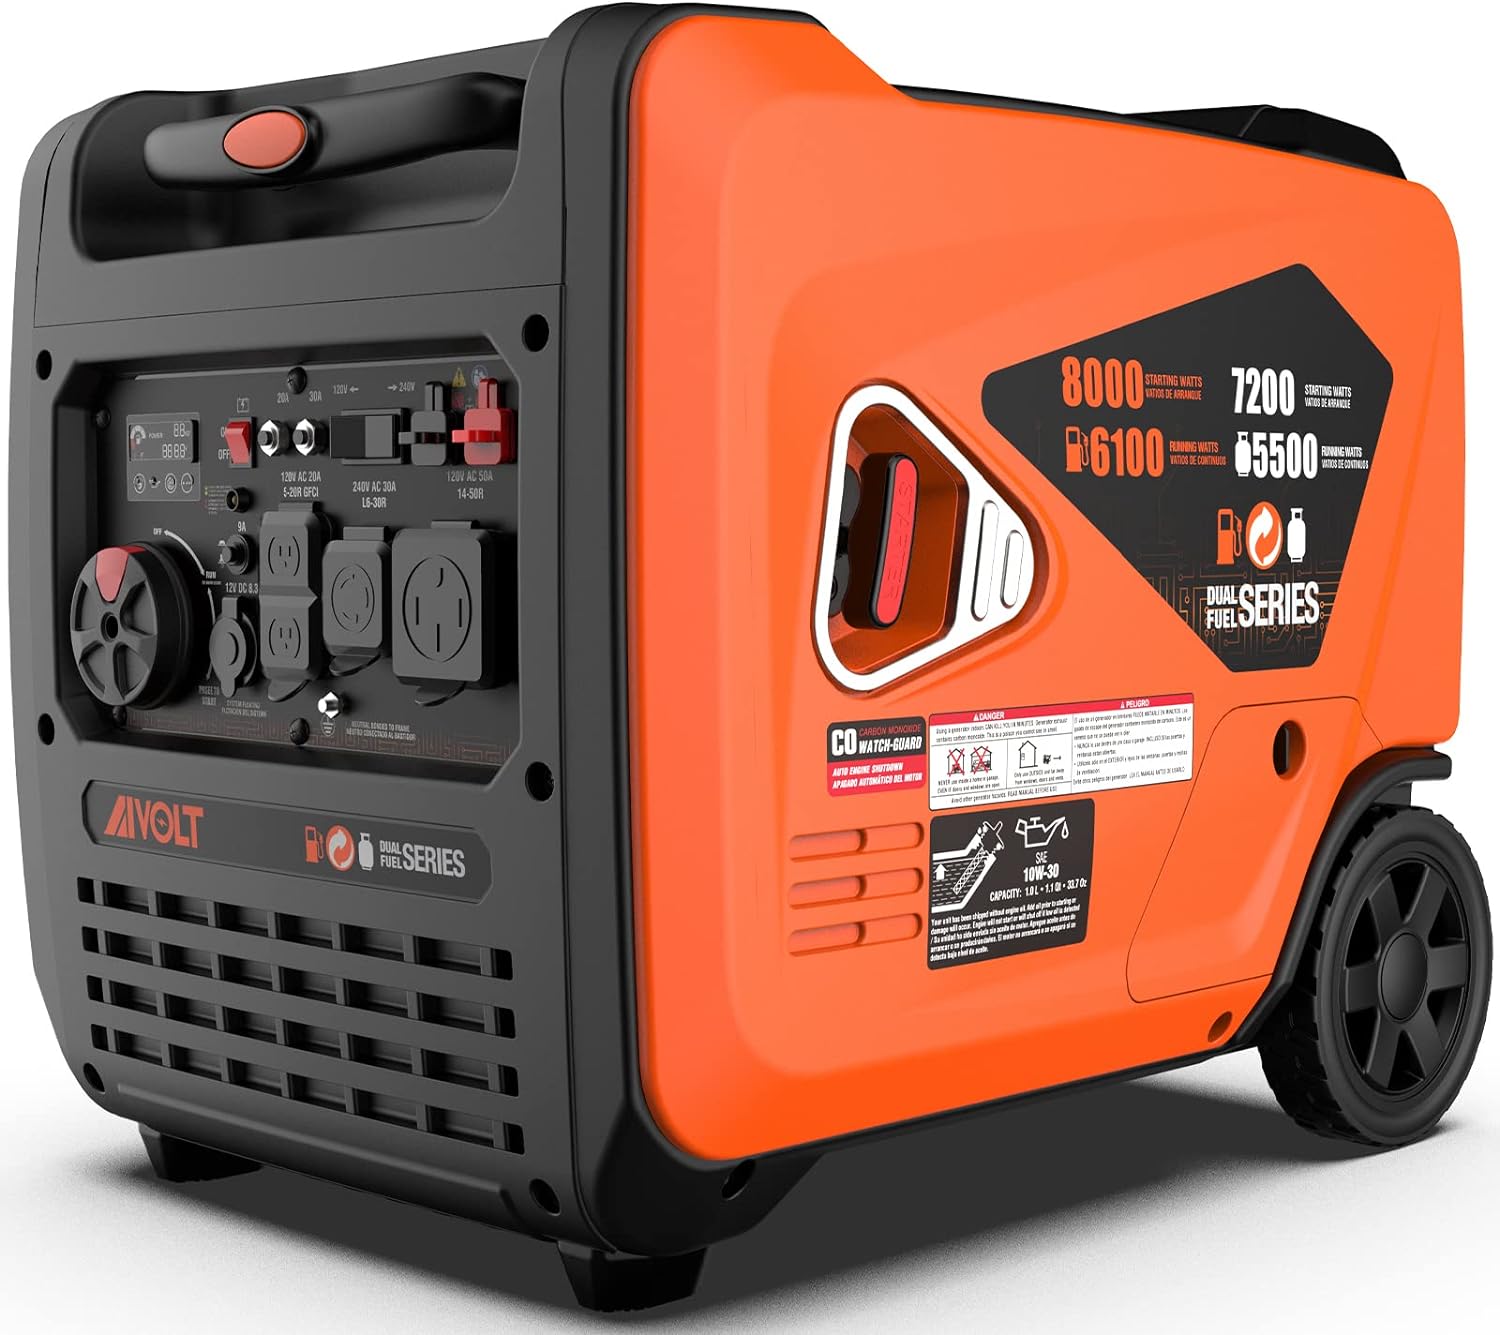 AIVOLT 8000 Watts Dual Fuel Portable Inverter Generator Super Quiet Gas Propane Powered Electric Start Outdoor Generator for Home Back Up Travel RV Camping